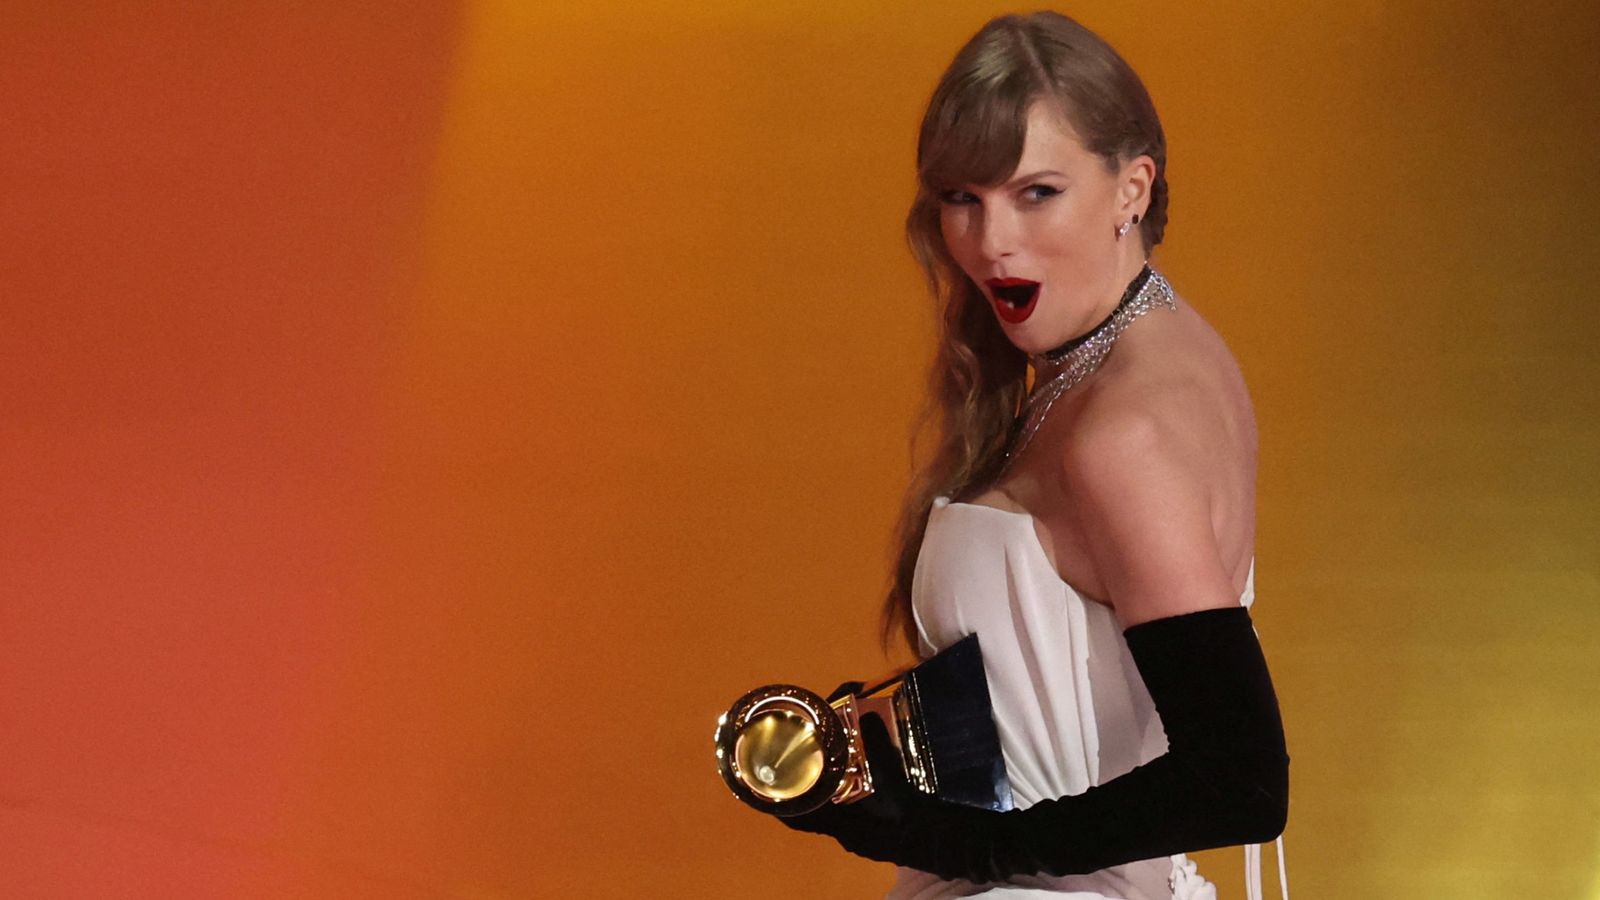 'Mind blown!' Taylor Swift makes history at the Grammys as she